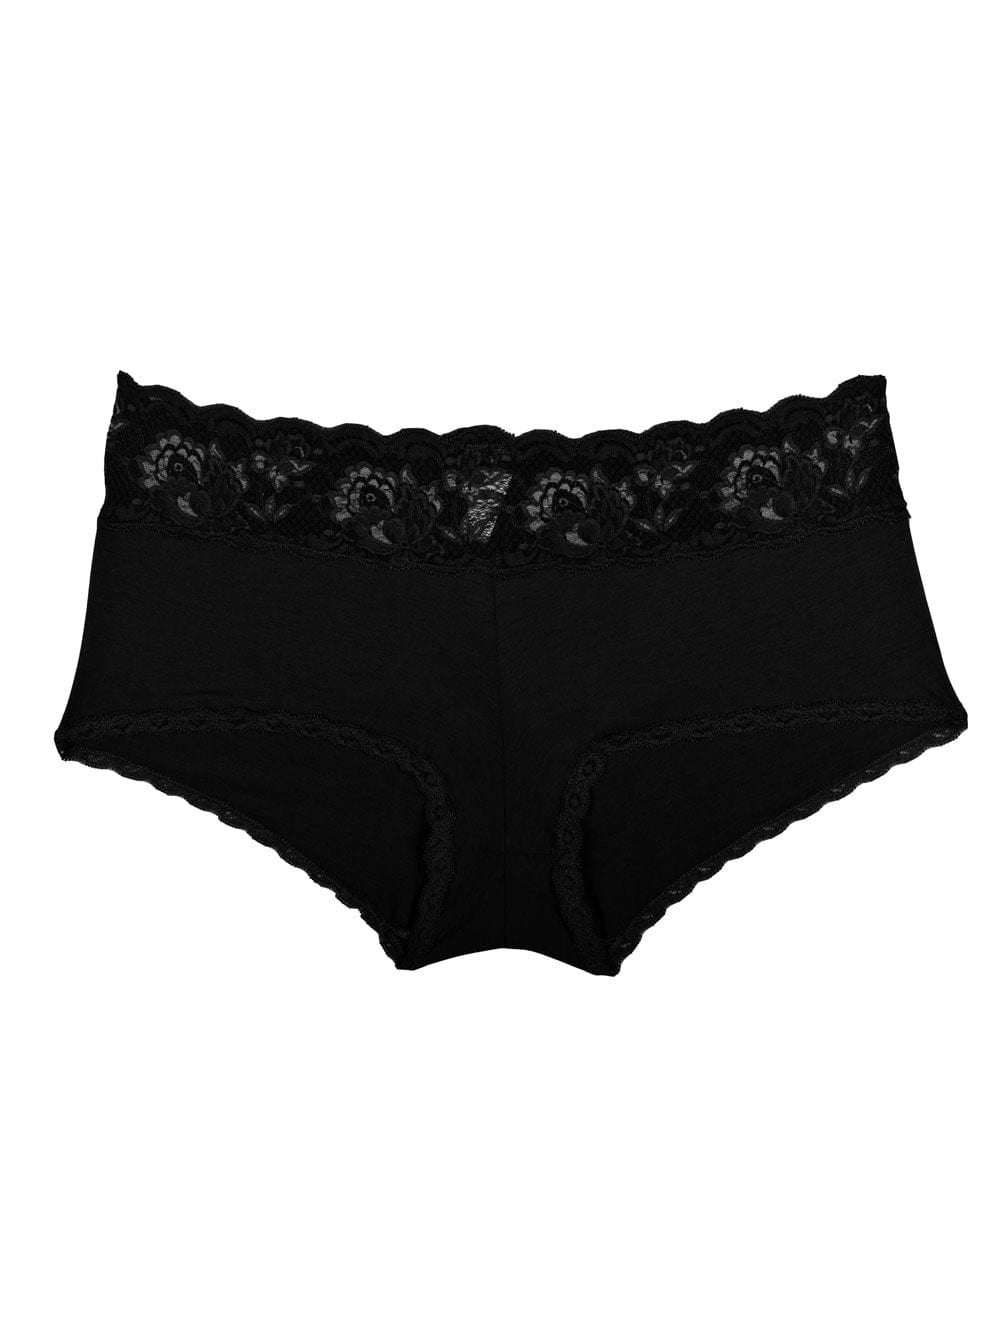 Cosabella Underwear Extended Never Say Never Lowrider Cheekie Hotpant - Black